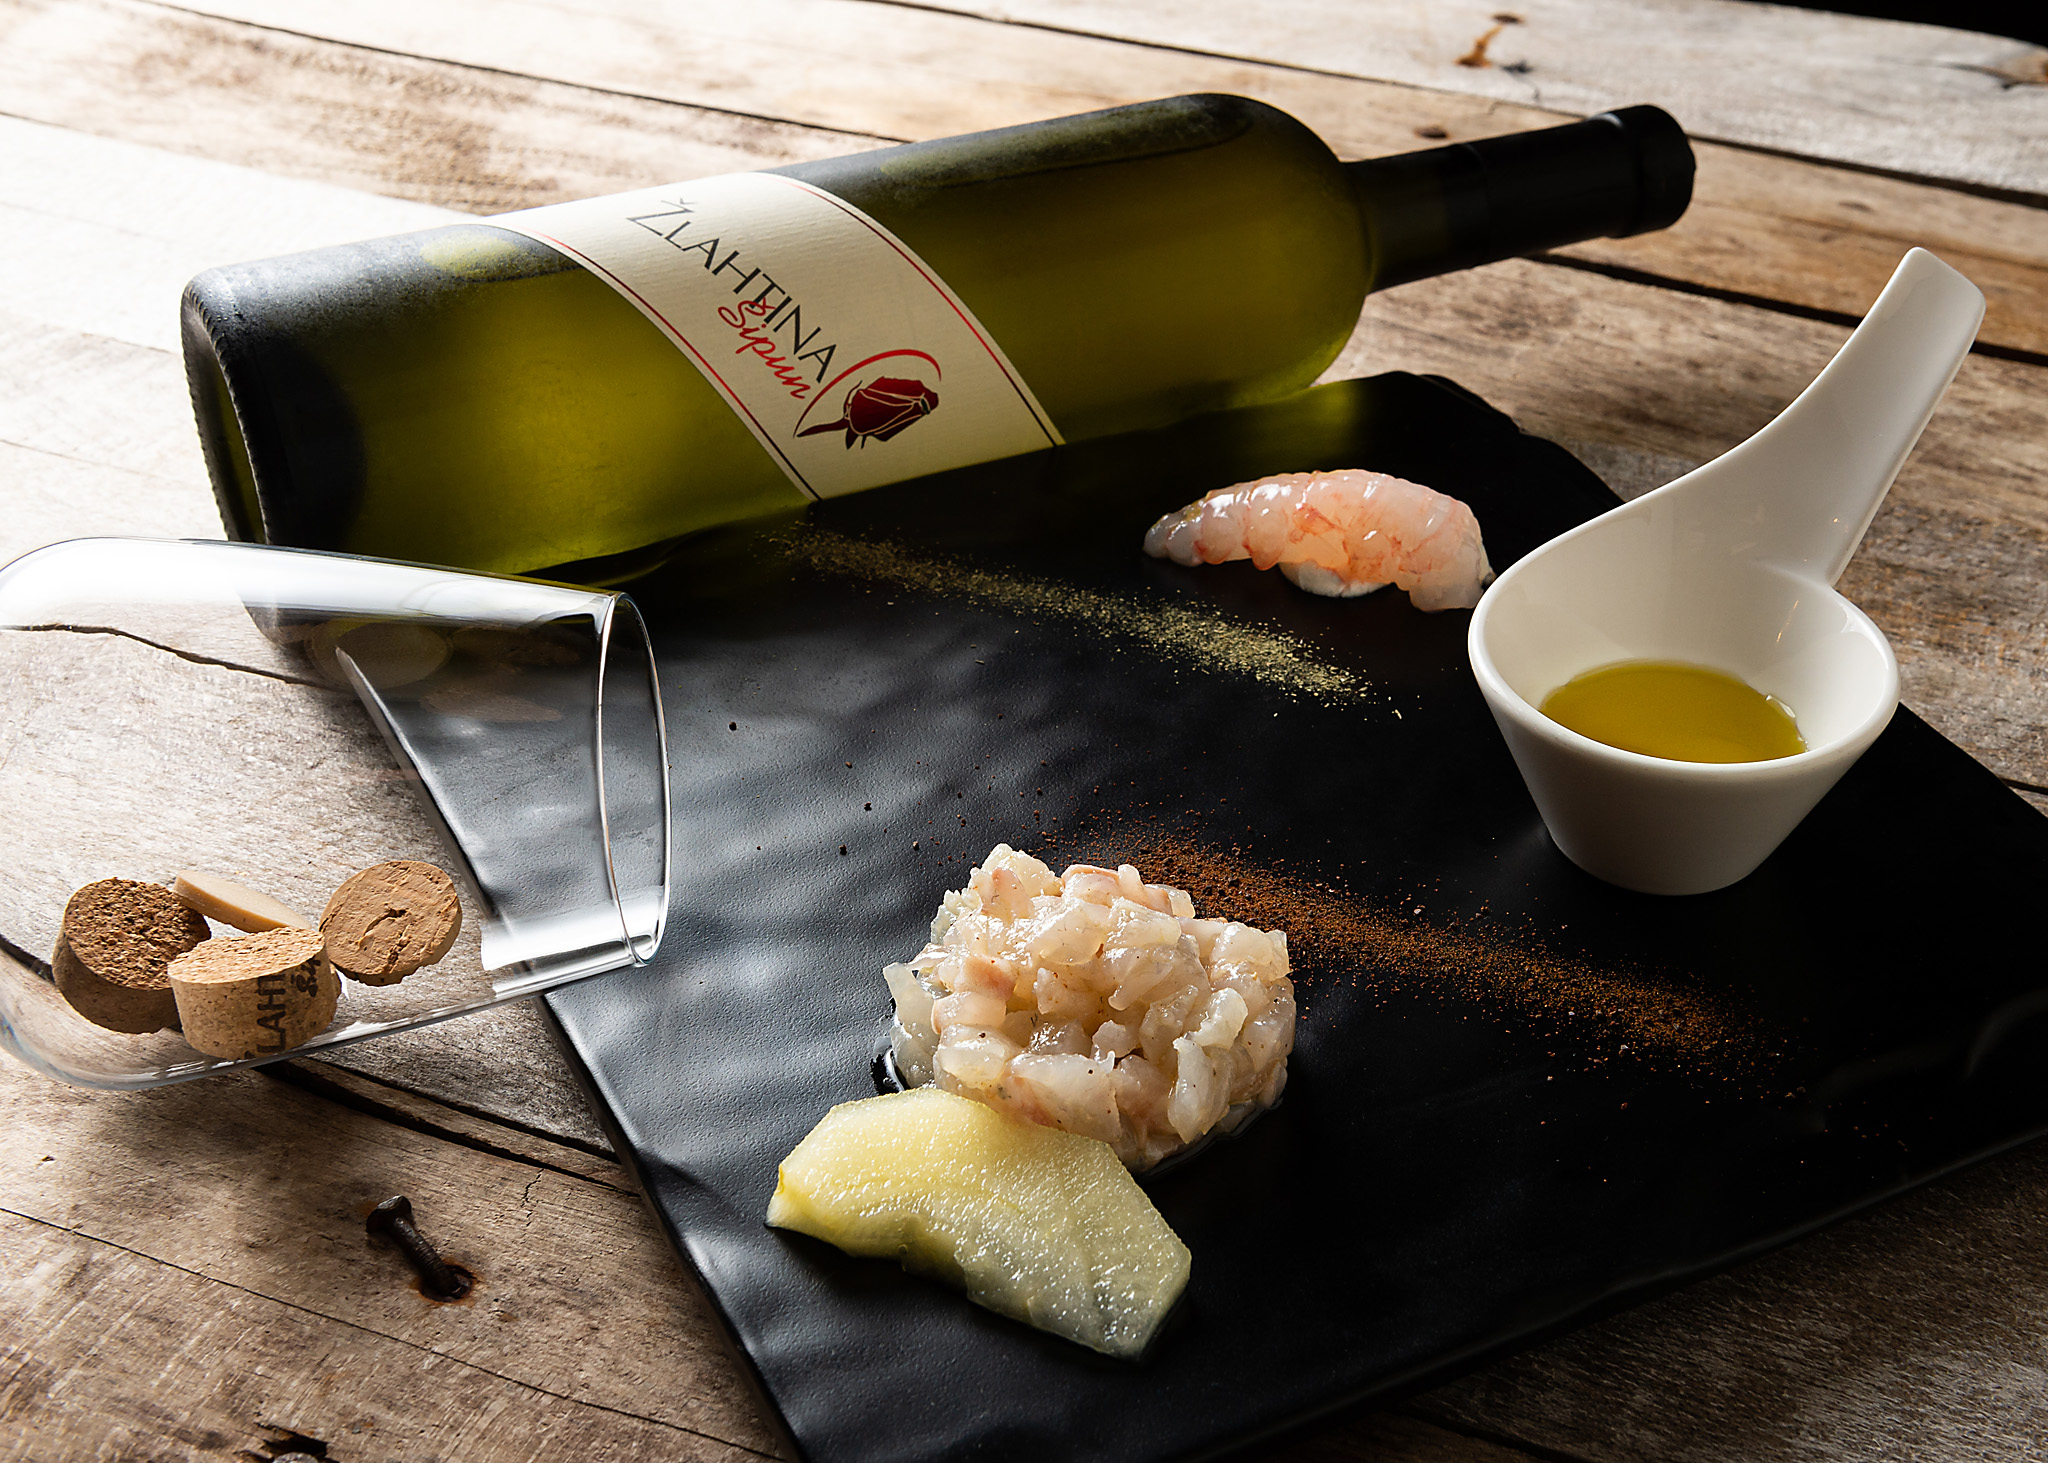 hren | plethora of creativity // Šipun winery product photography at Rivica restaurant